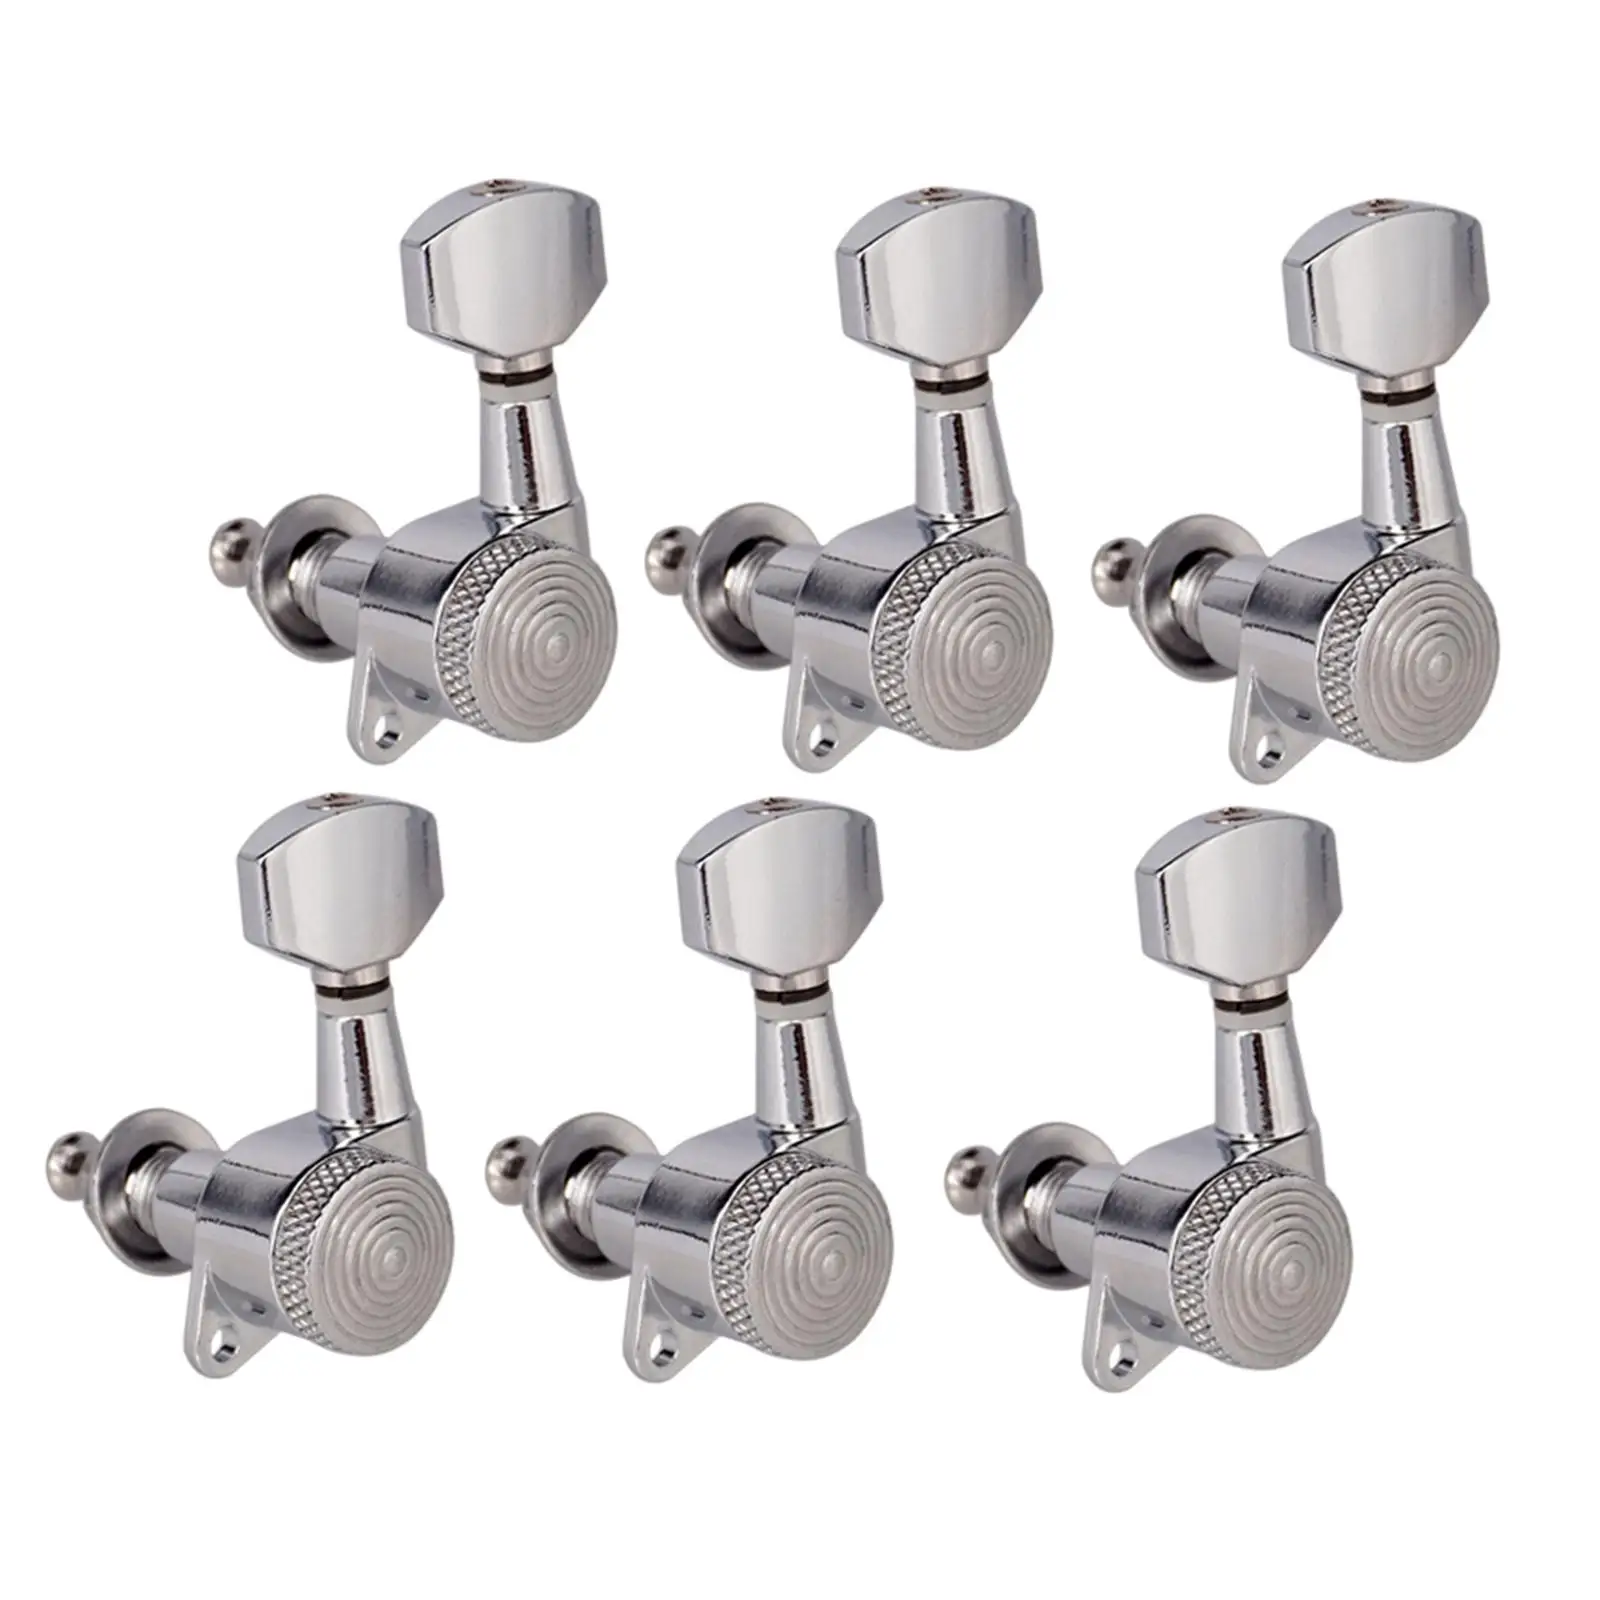 6Pack of Guitar String Peg Locking Tuners Tuning Pegs Guitar for Machine Head Guitar Parts & Accessories